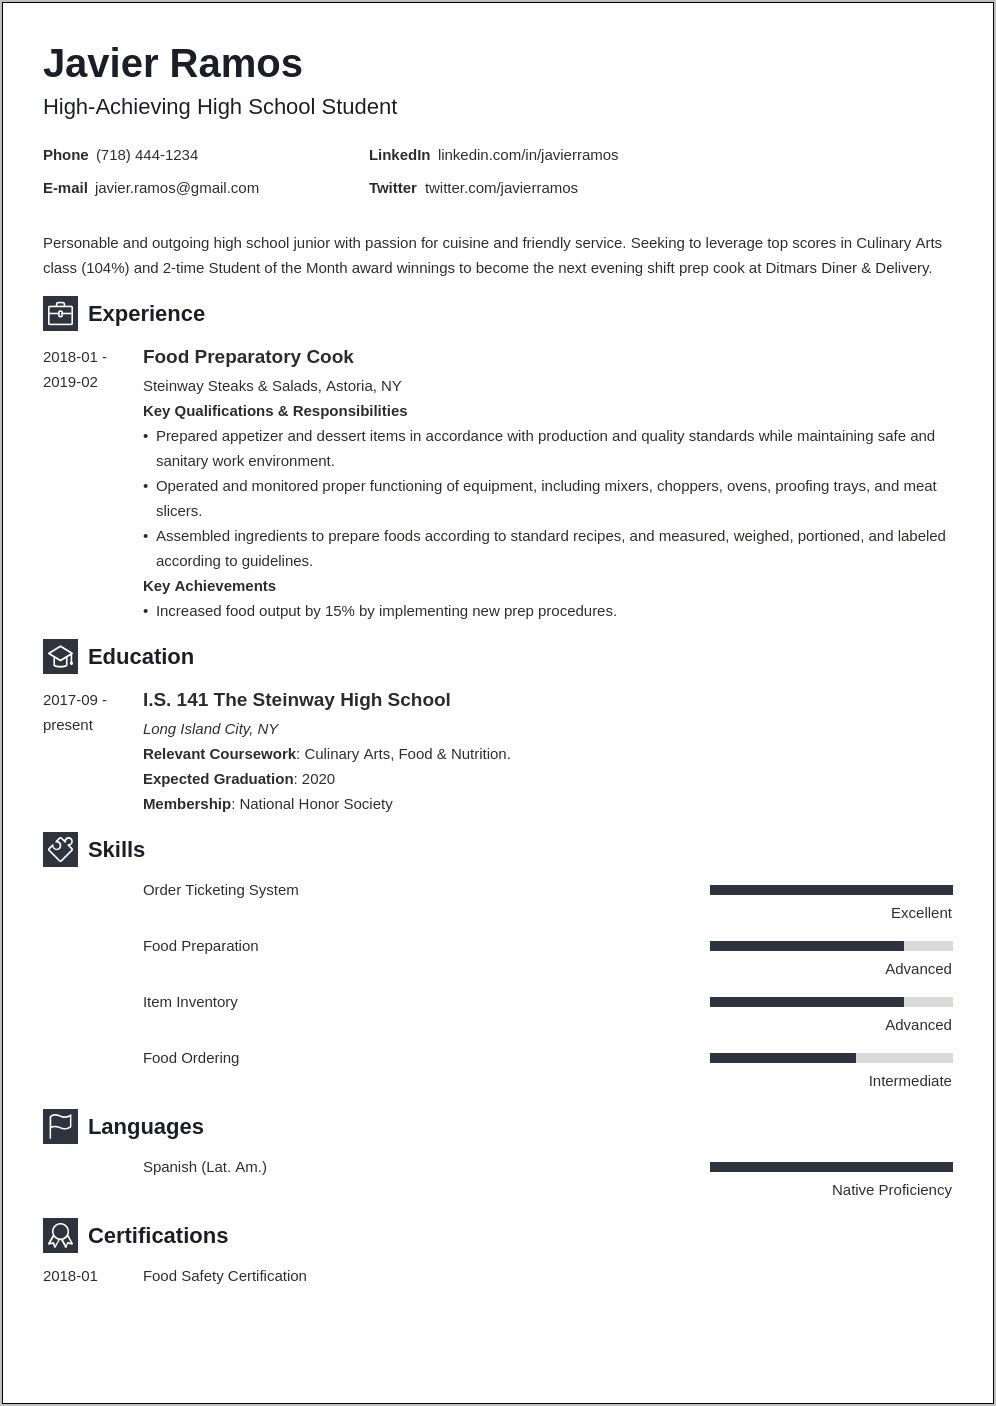 Resume Objective Examples For High School Students